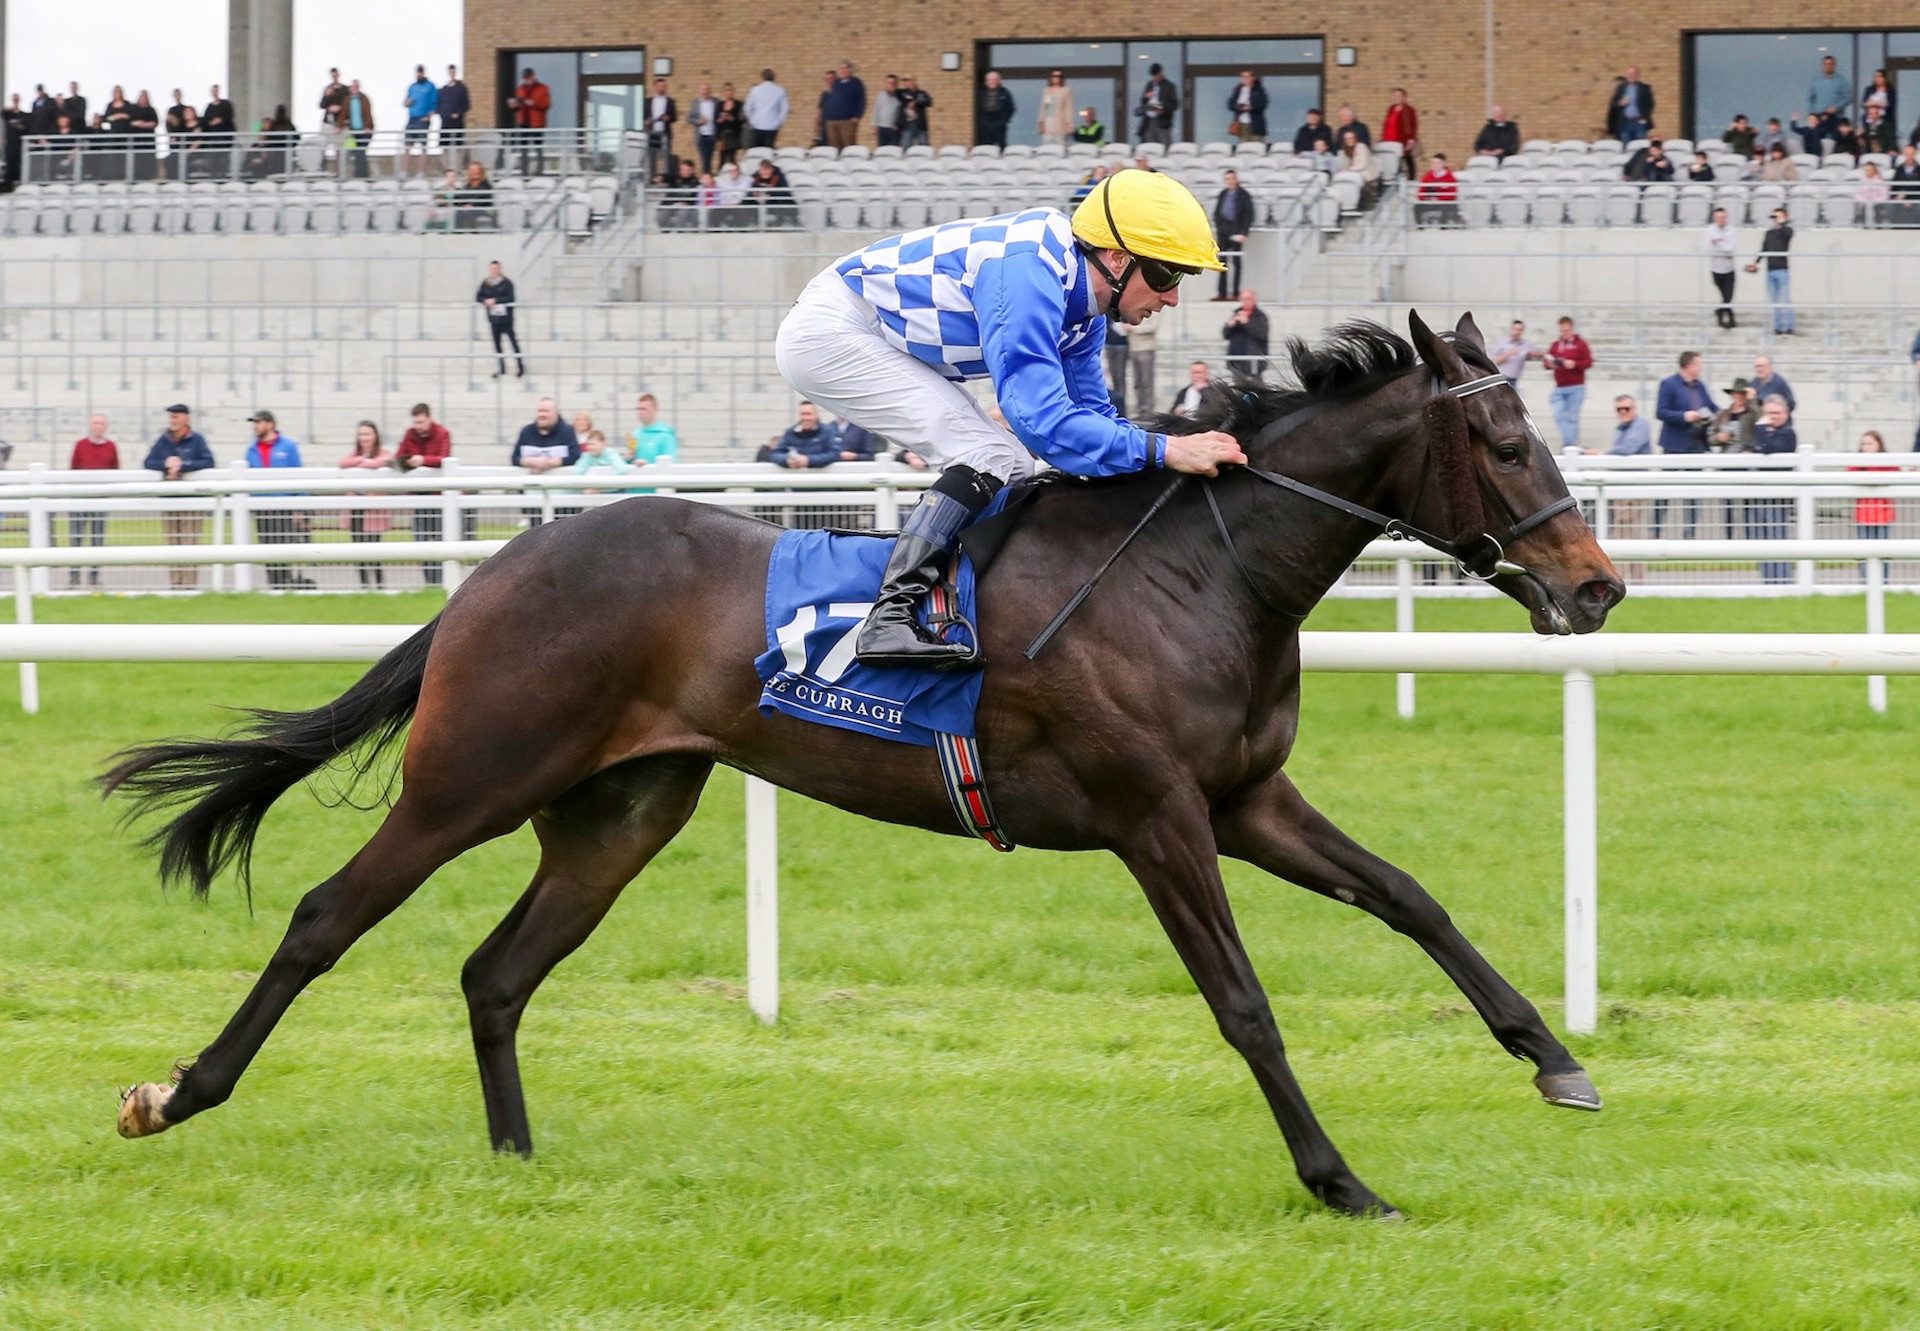 Matilda Picotte (Sioux Nation) Makes An Impressive Debut At The Curragh